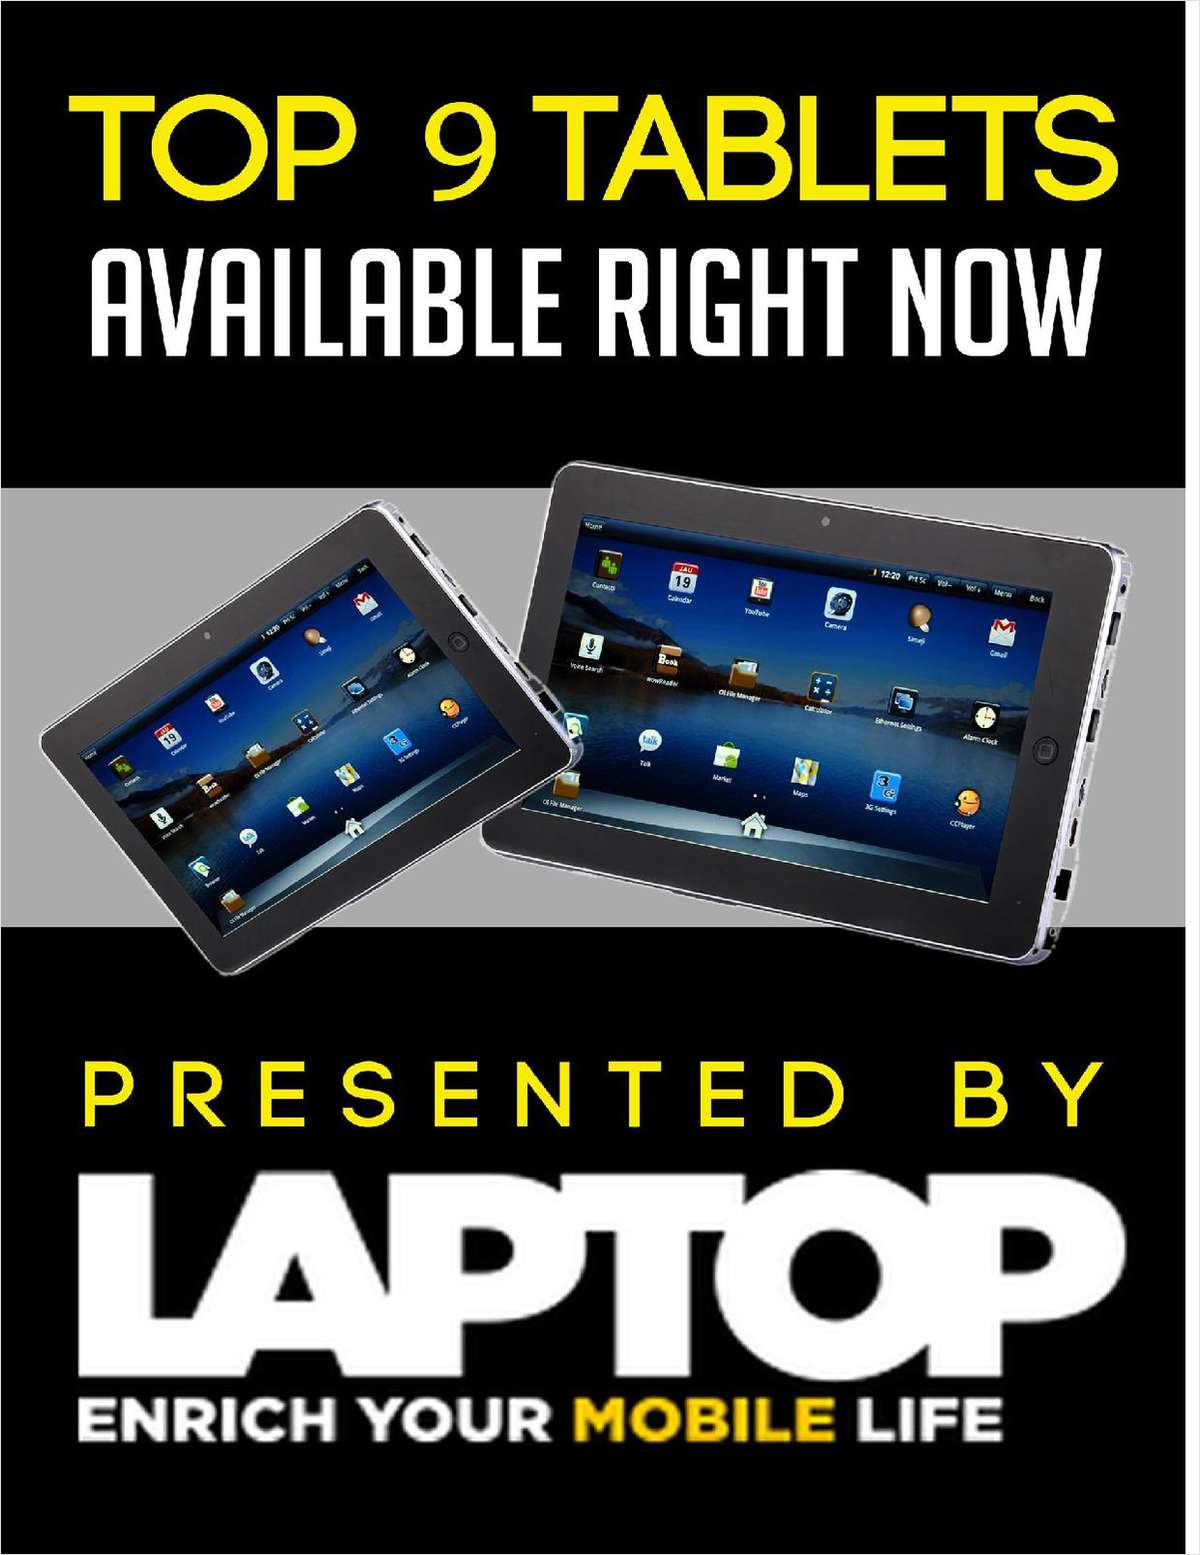 Top 9 Tablets Available Right Now